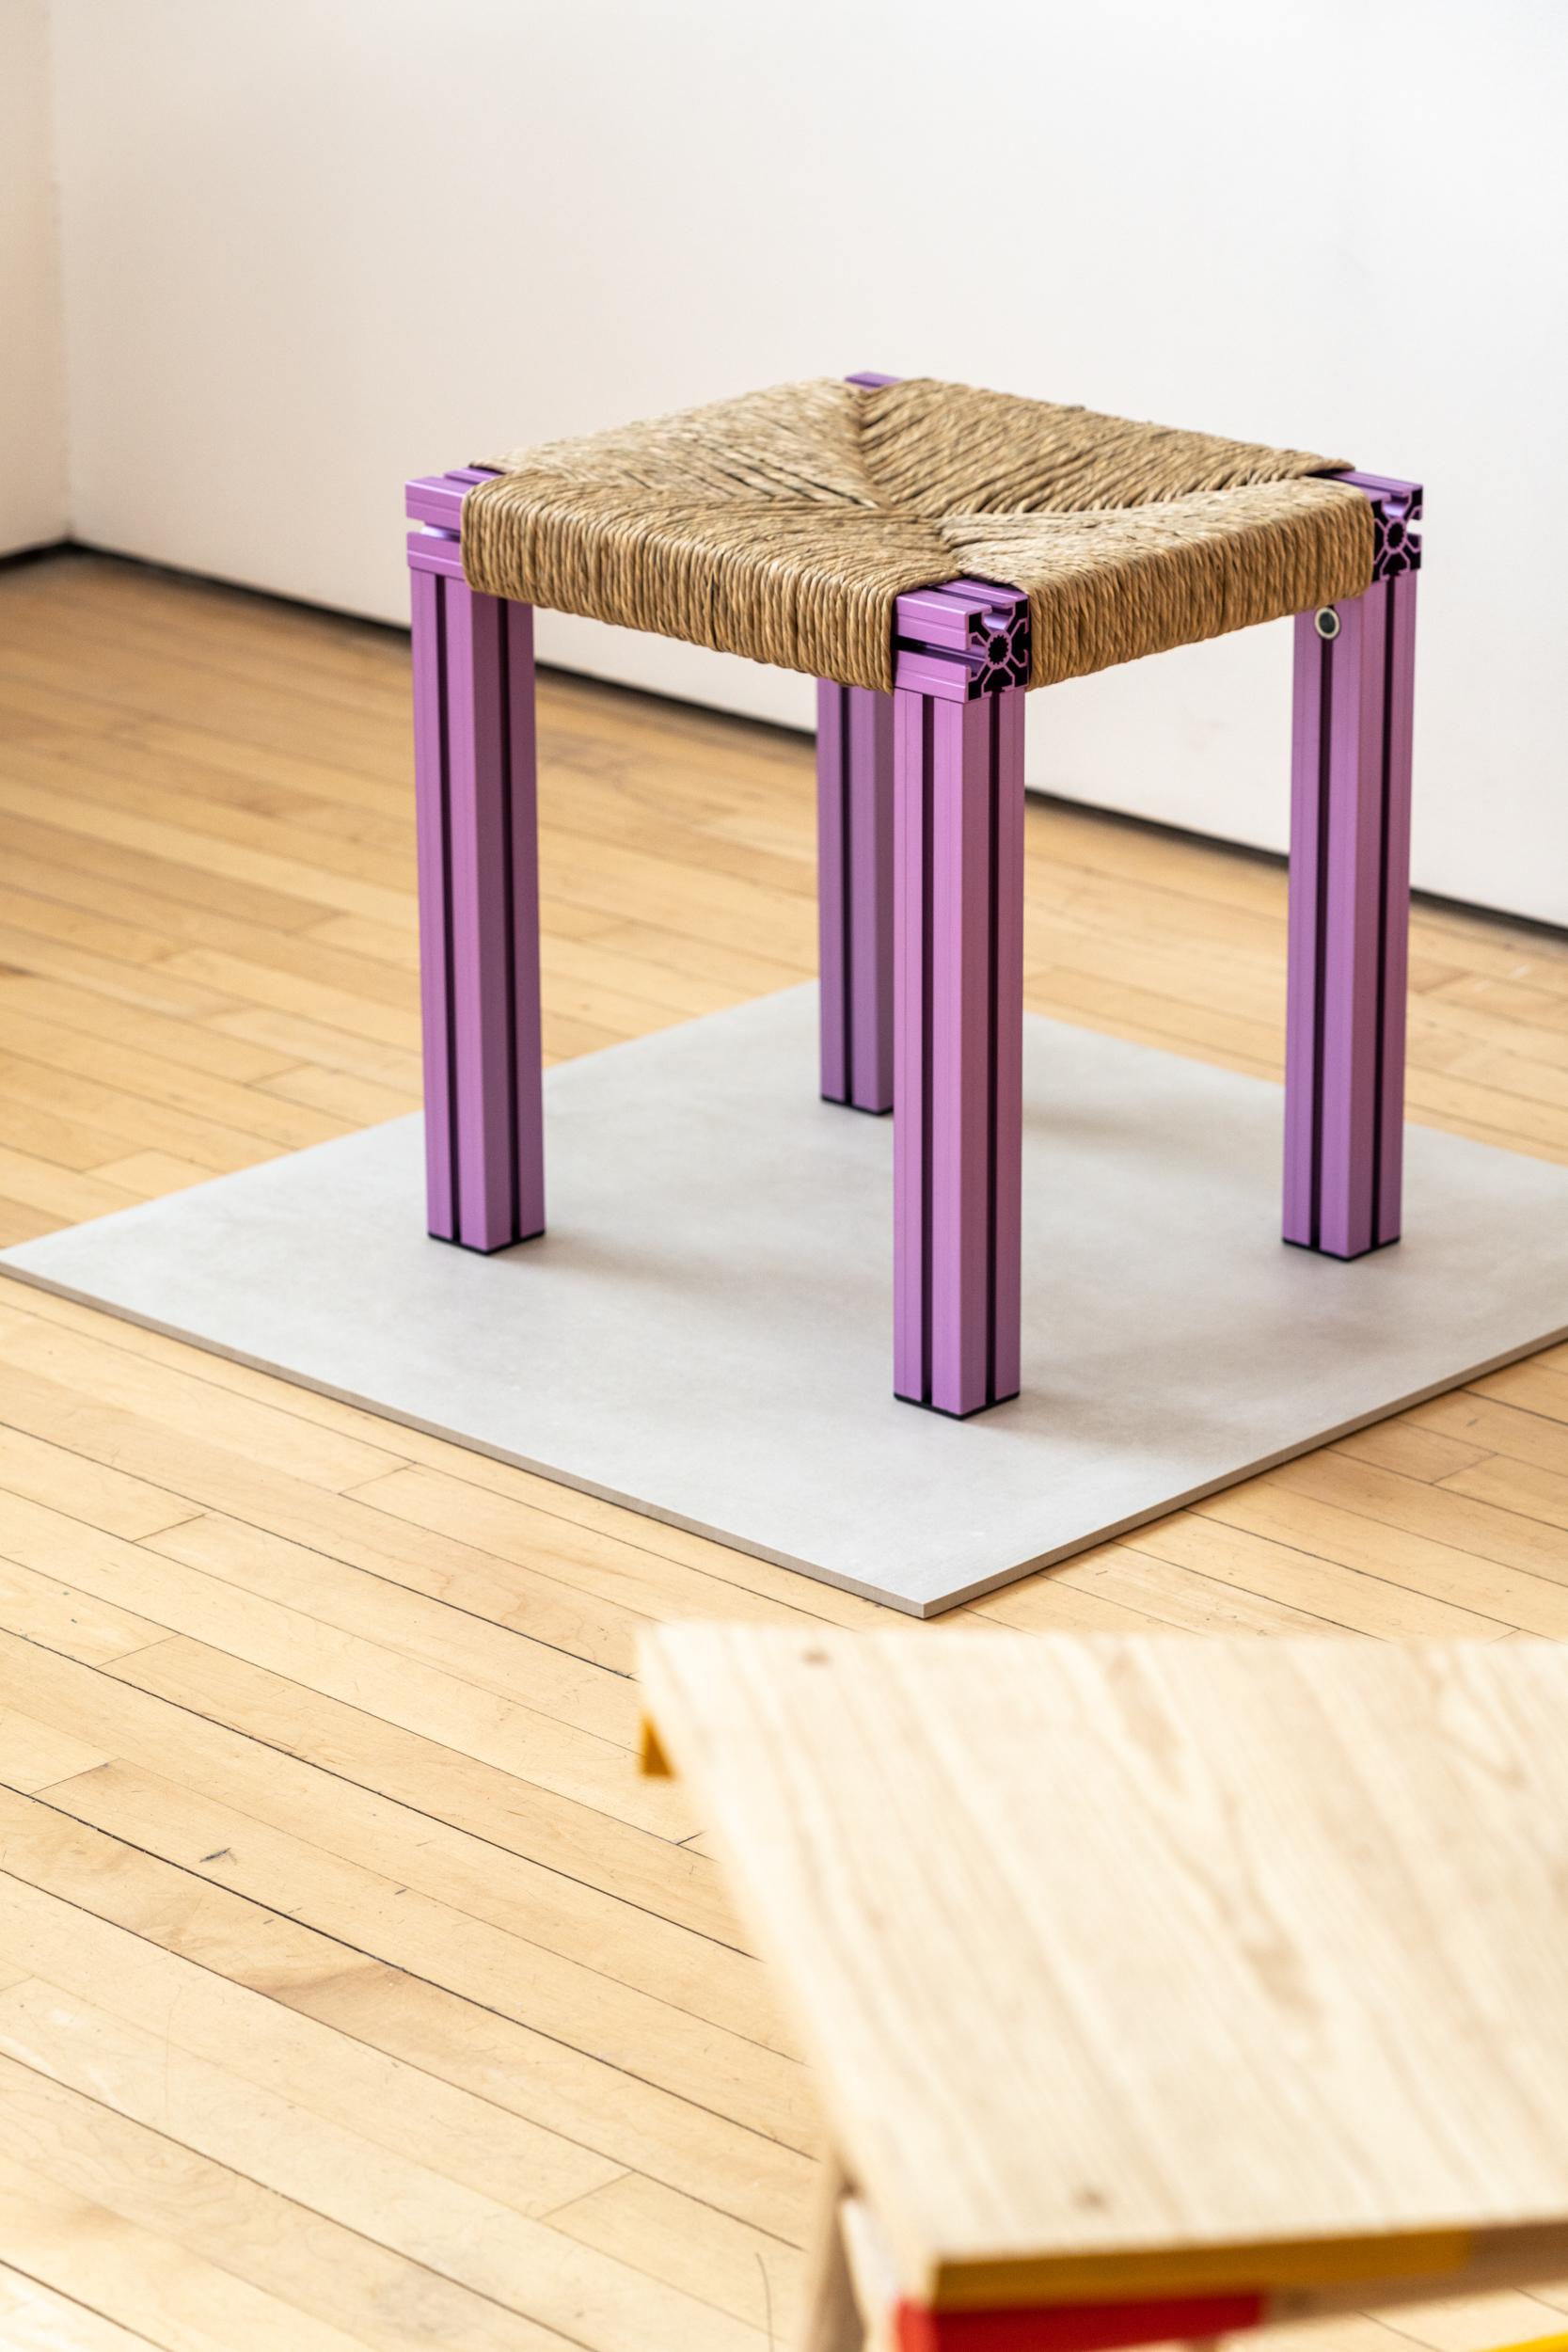 Anodized Purple and Rush Weave Wicker Stool by Tino Seubert For Sale 2